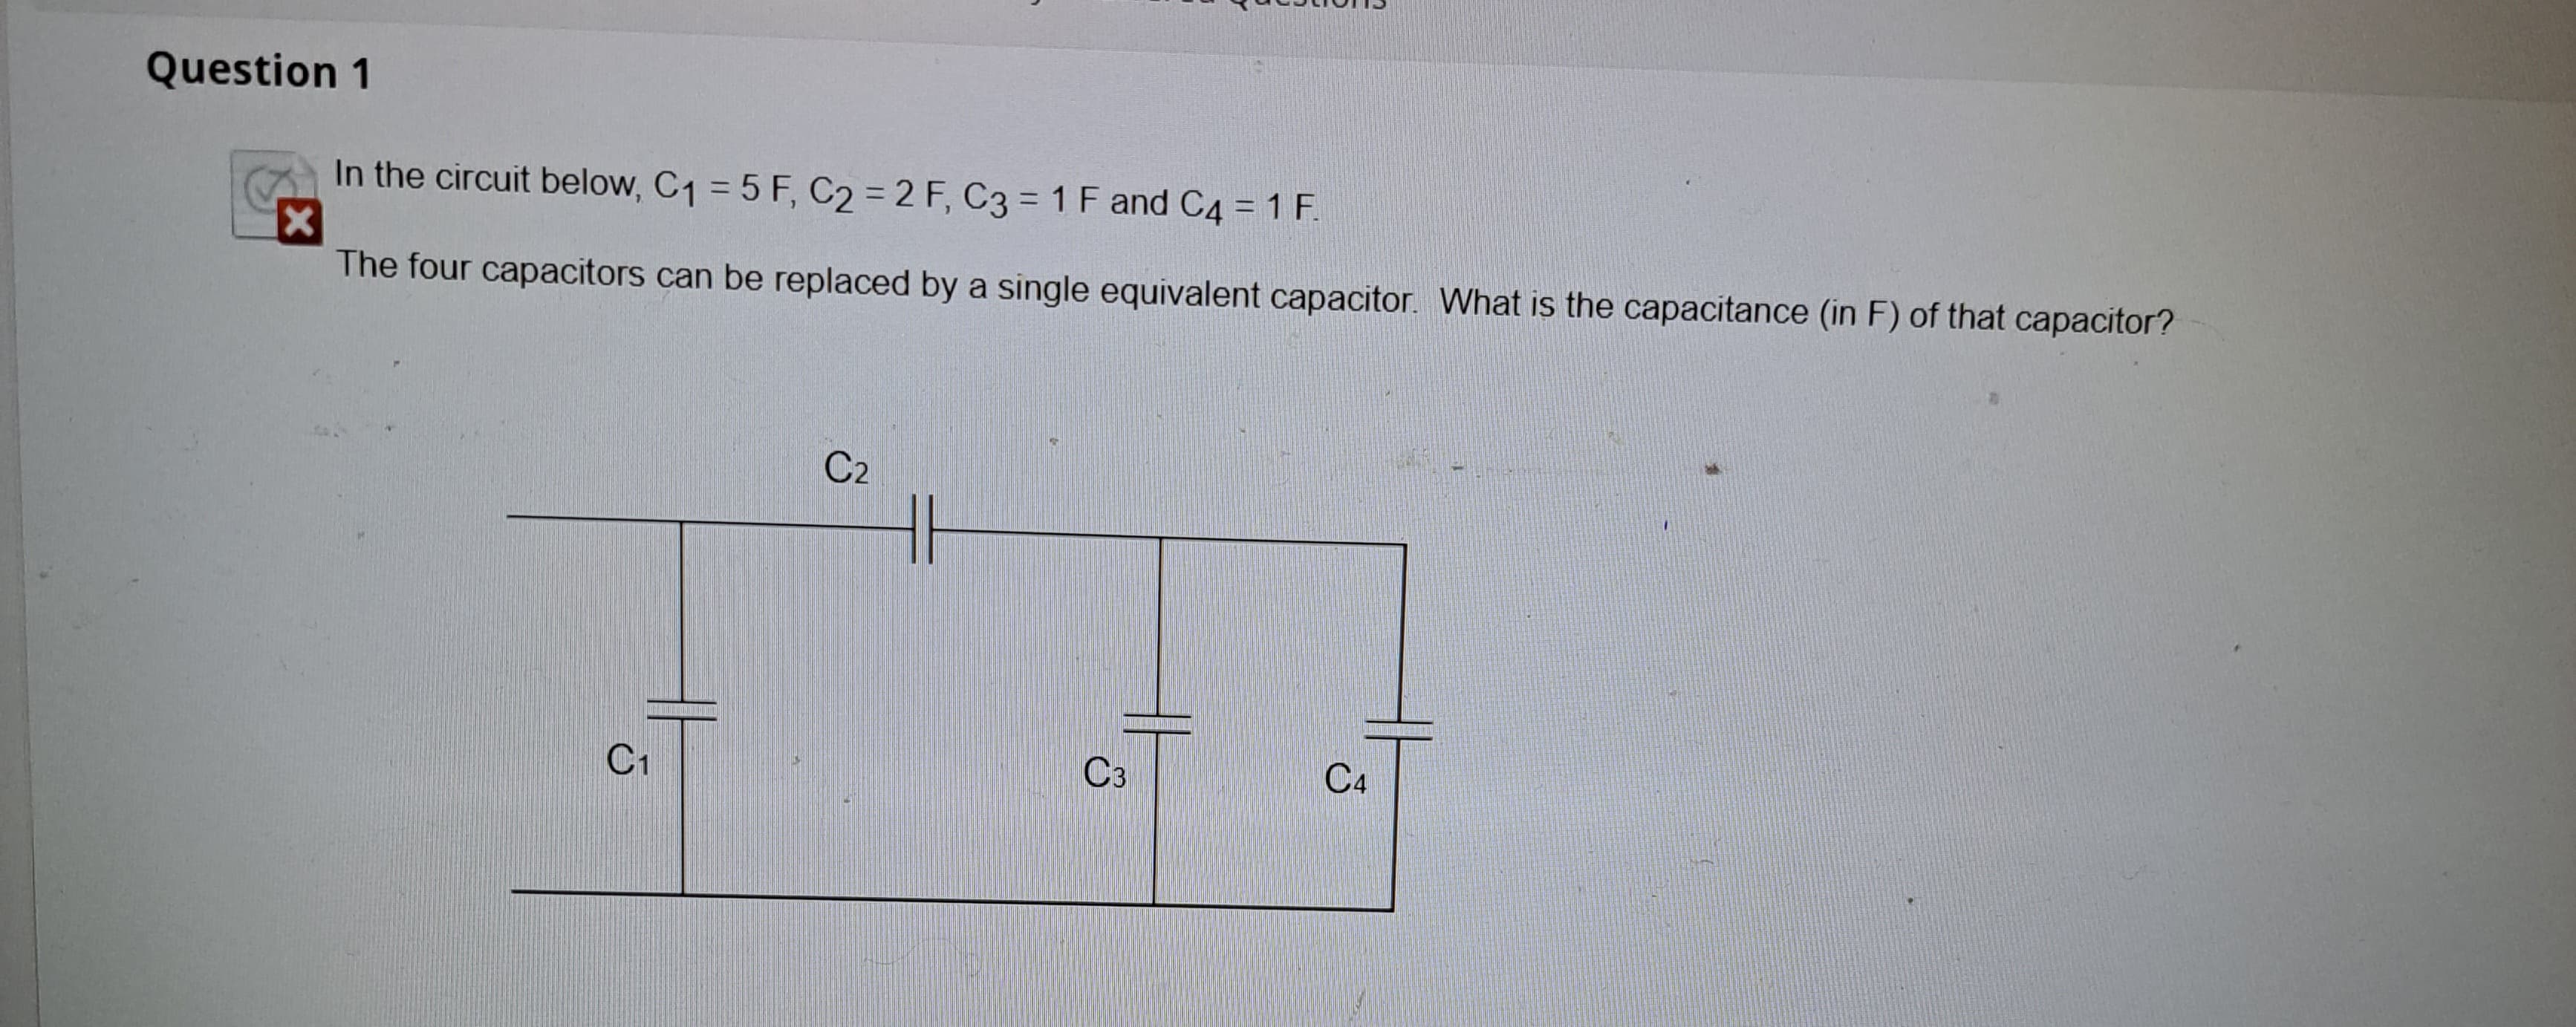 Question 1
In the circuit below, C₁ = 5 F, C2 = 2 F, C3= 1 F and C4 = 1 F.
x
The four capacitors can be replaced by a single equivalent capacitor. What is the capacitance (in F) of that capacitor?
C1
C₂
C3
C4